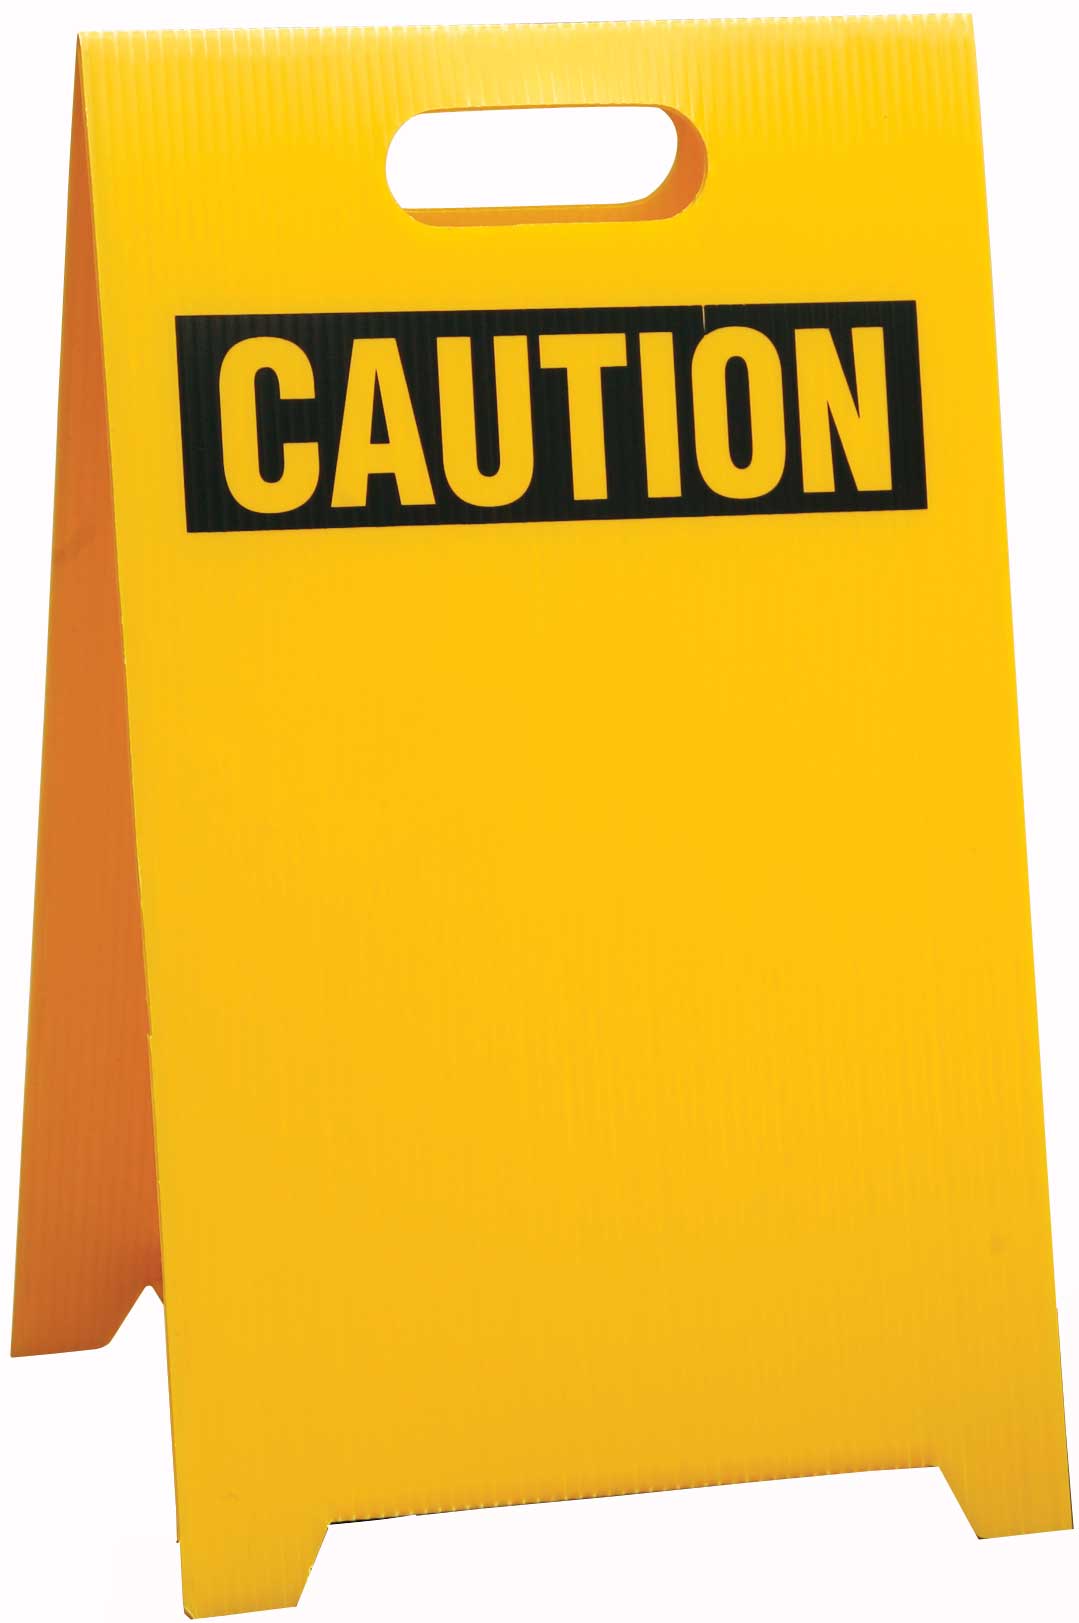 Larger Photo - Yellow Blank Floor Stand Sign w/ Caution Legend - 42323